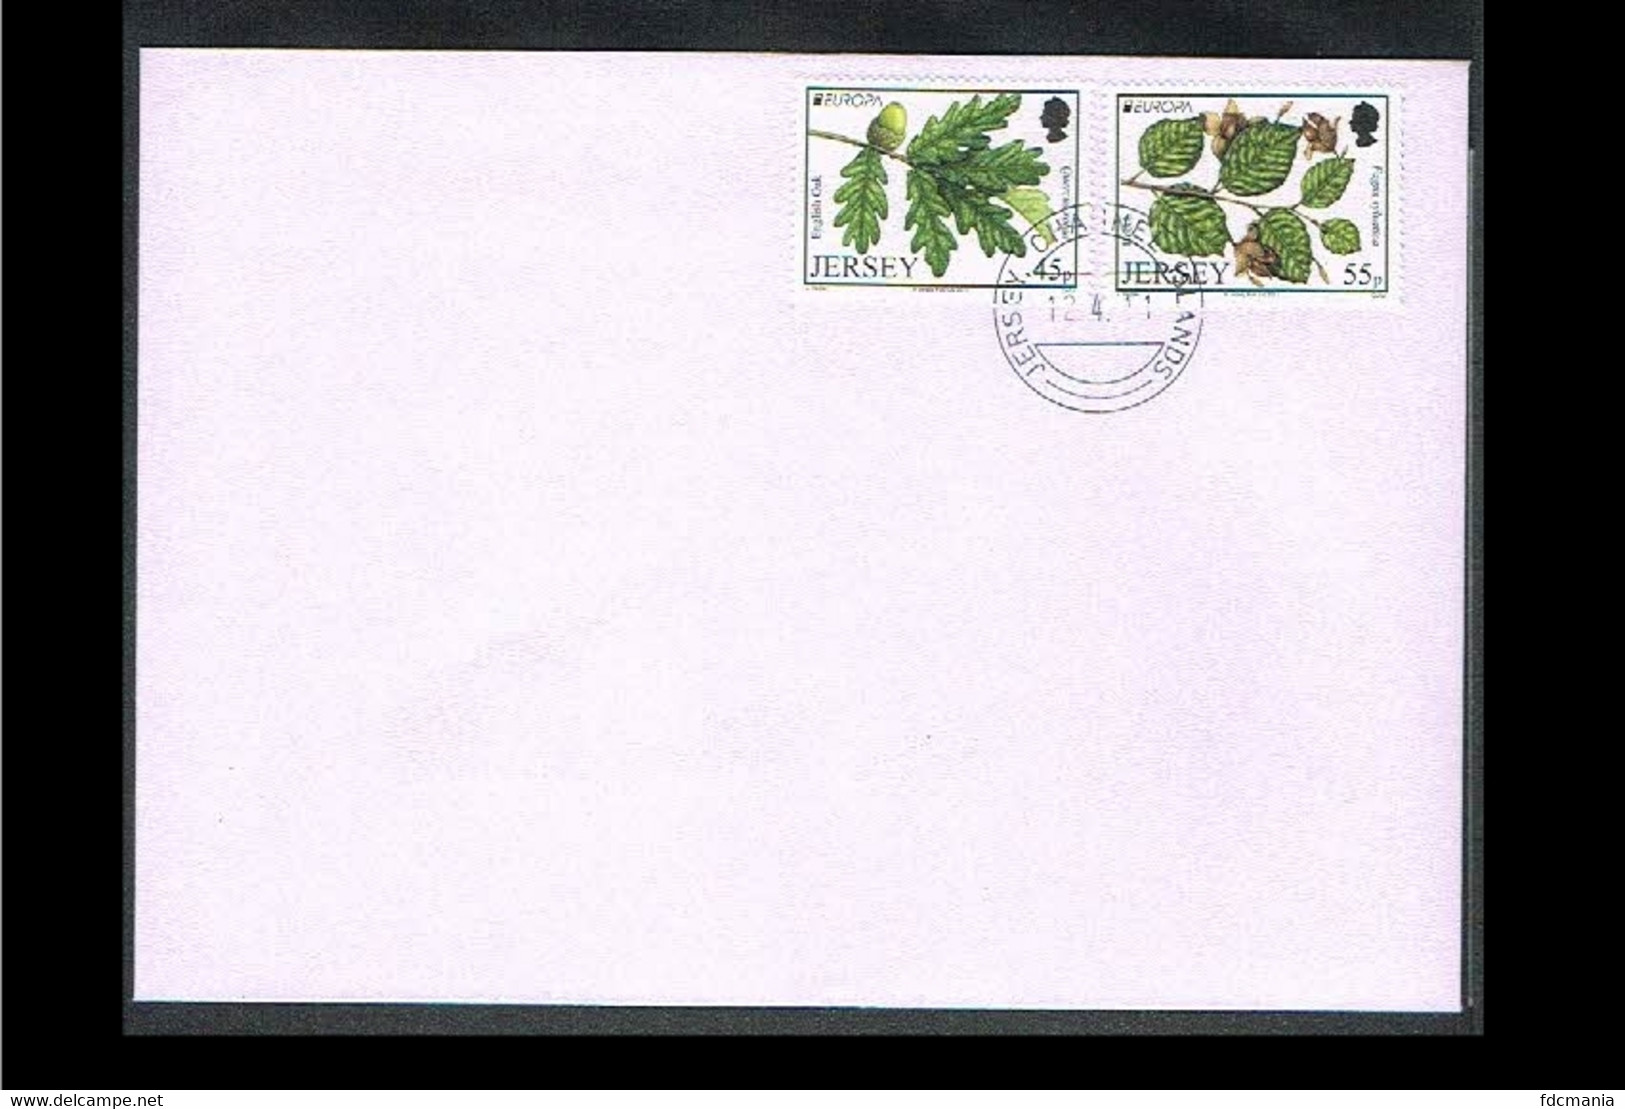 2011 - Europe CEPT Cover Great Britain-Jersey - Woods - Cancel Jersey [VS066] - 2011